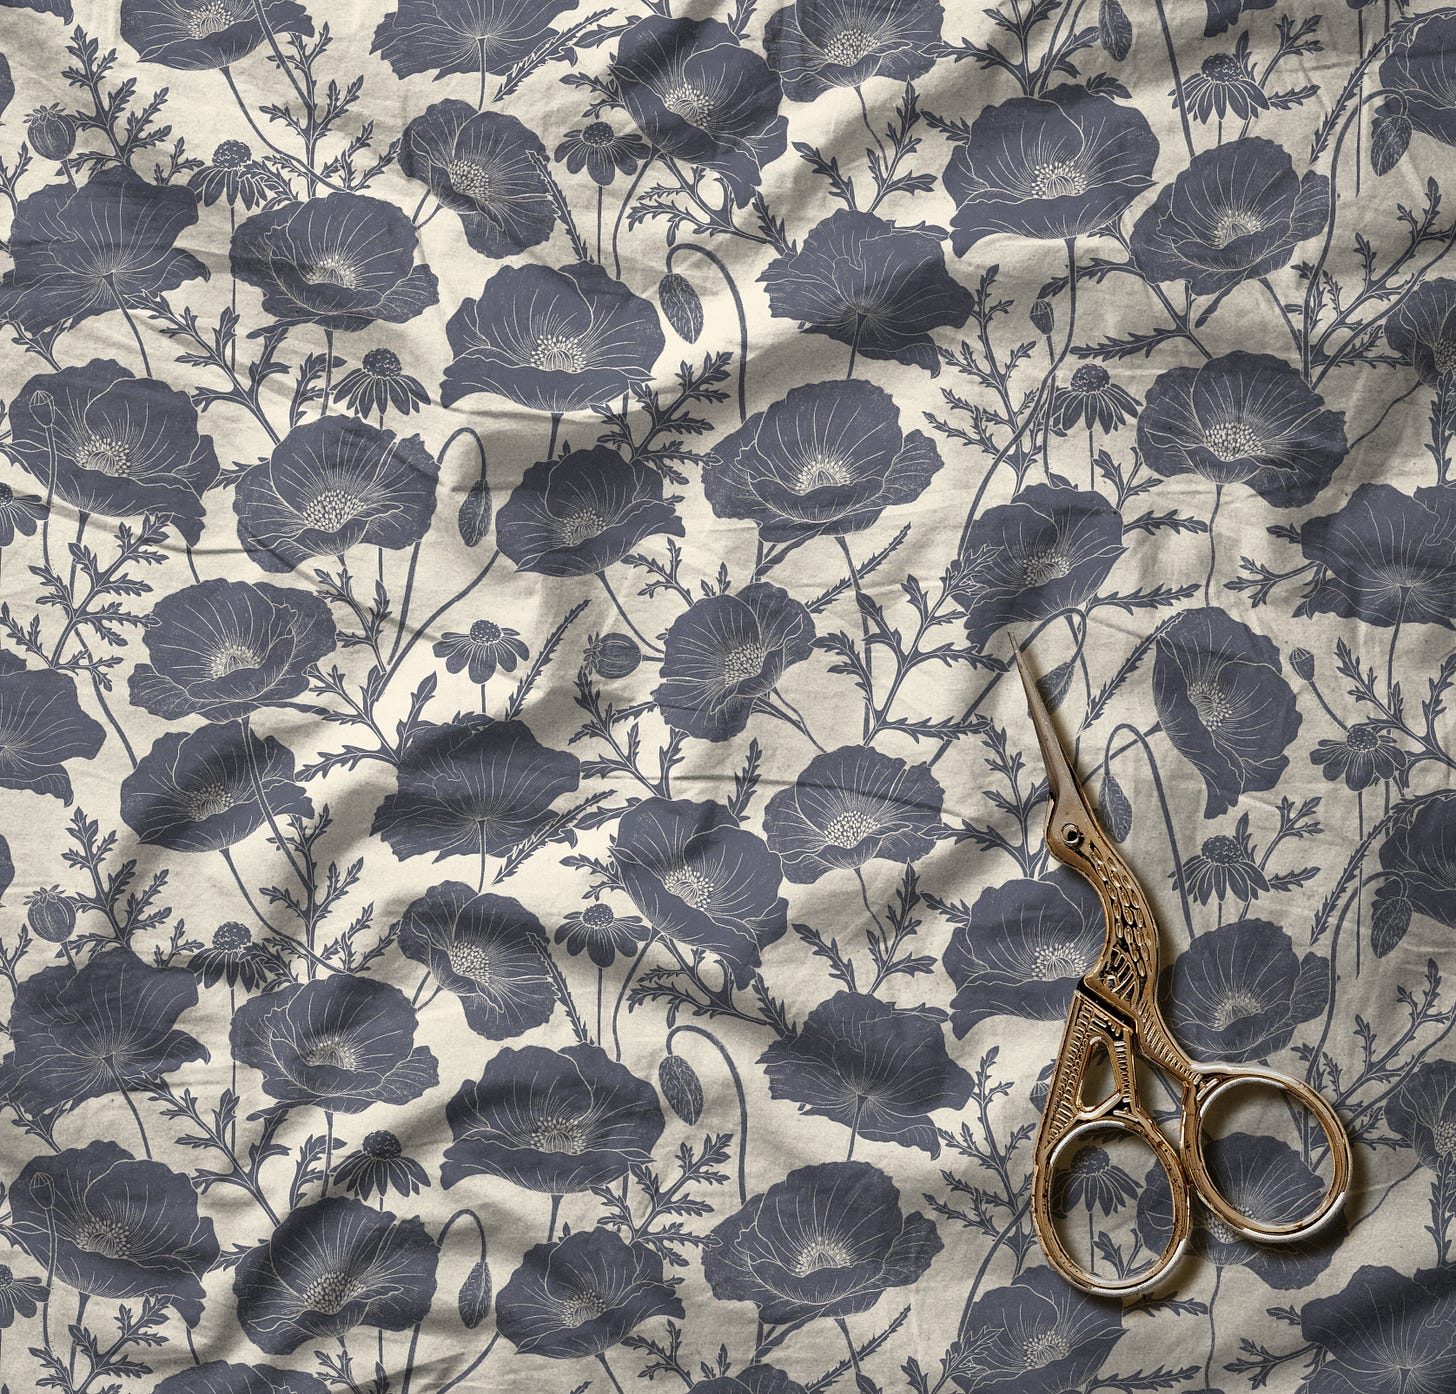 The new floral blue and white pattern mocked up as fabric. The fabric is spread out on a flat surface from edge to edge of the image, and on it rests a pair of scissors with a bird design on them. 